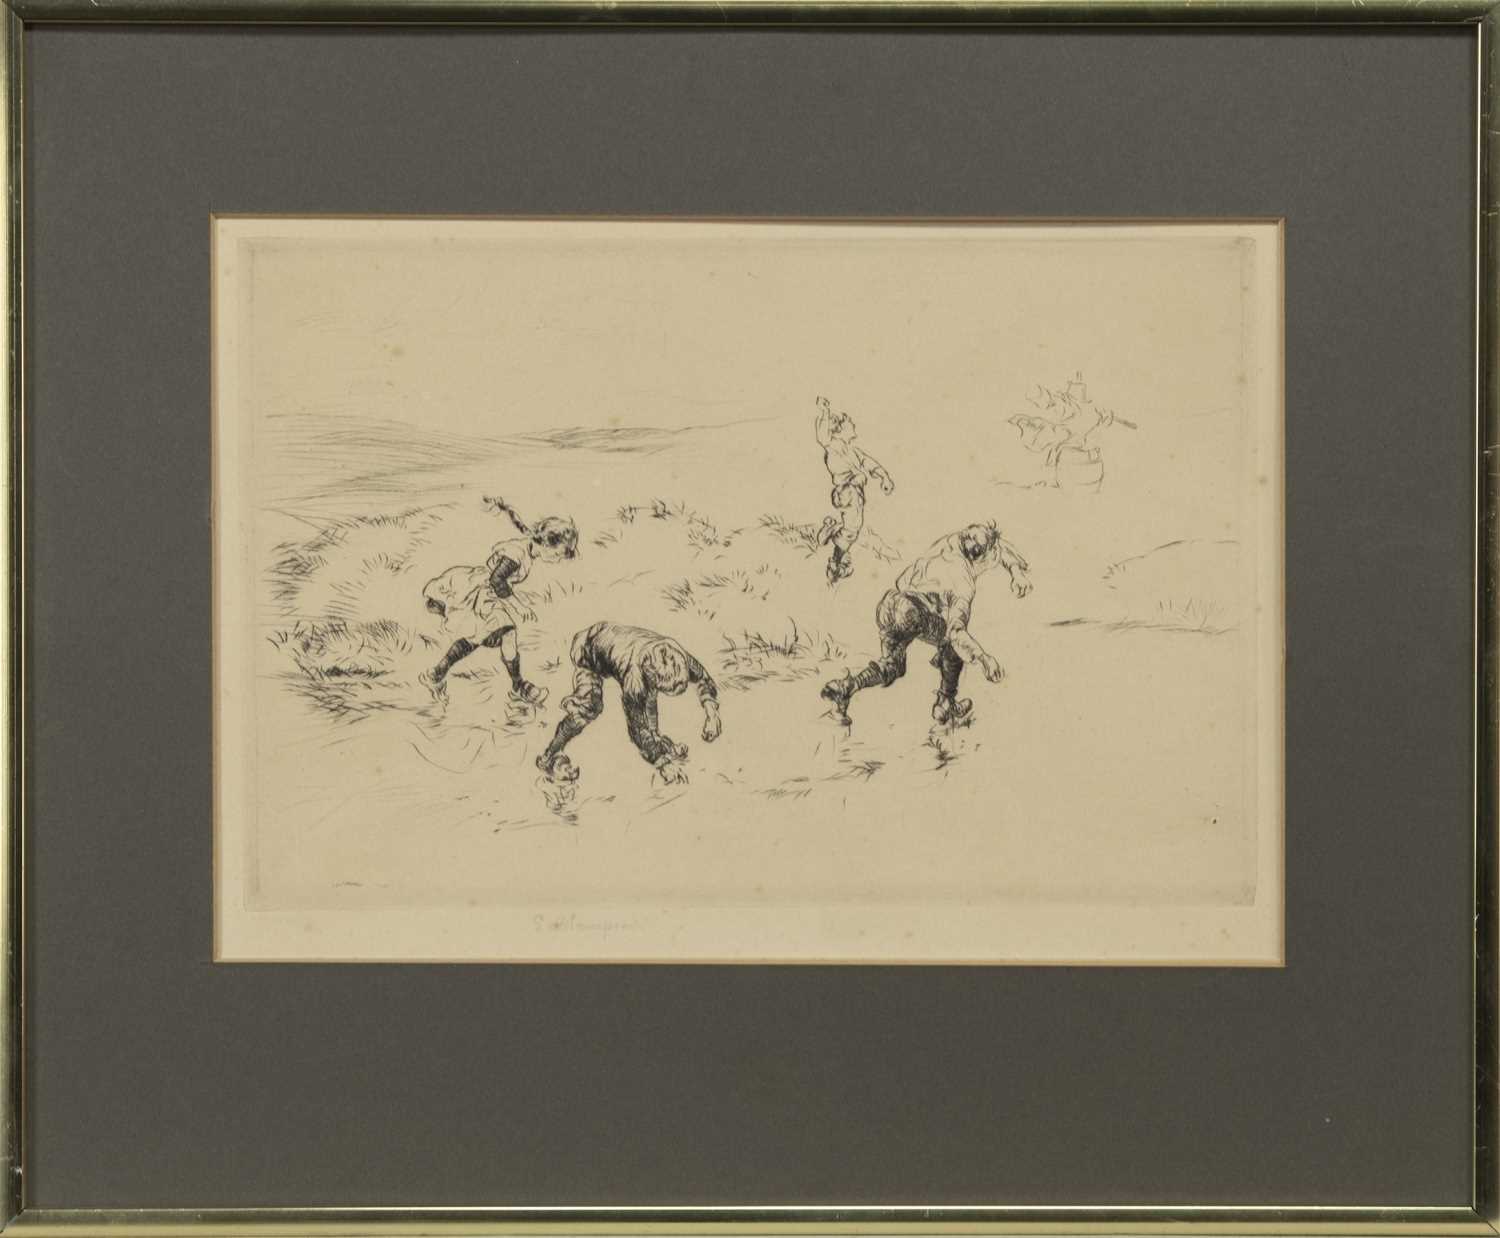 Lot 145 - CHILDREN PLAYING, AN ETCHING BY EDMUND BLAMPIED